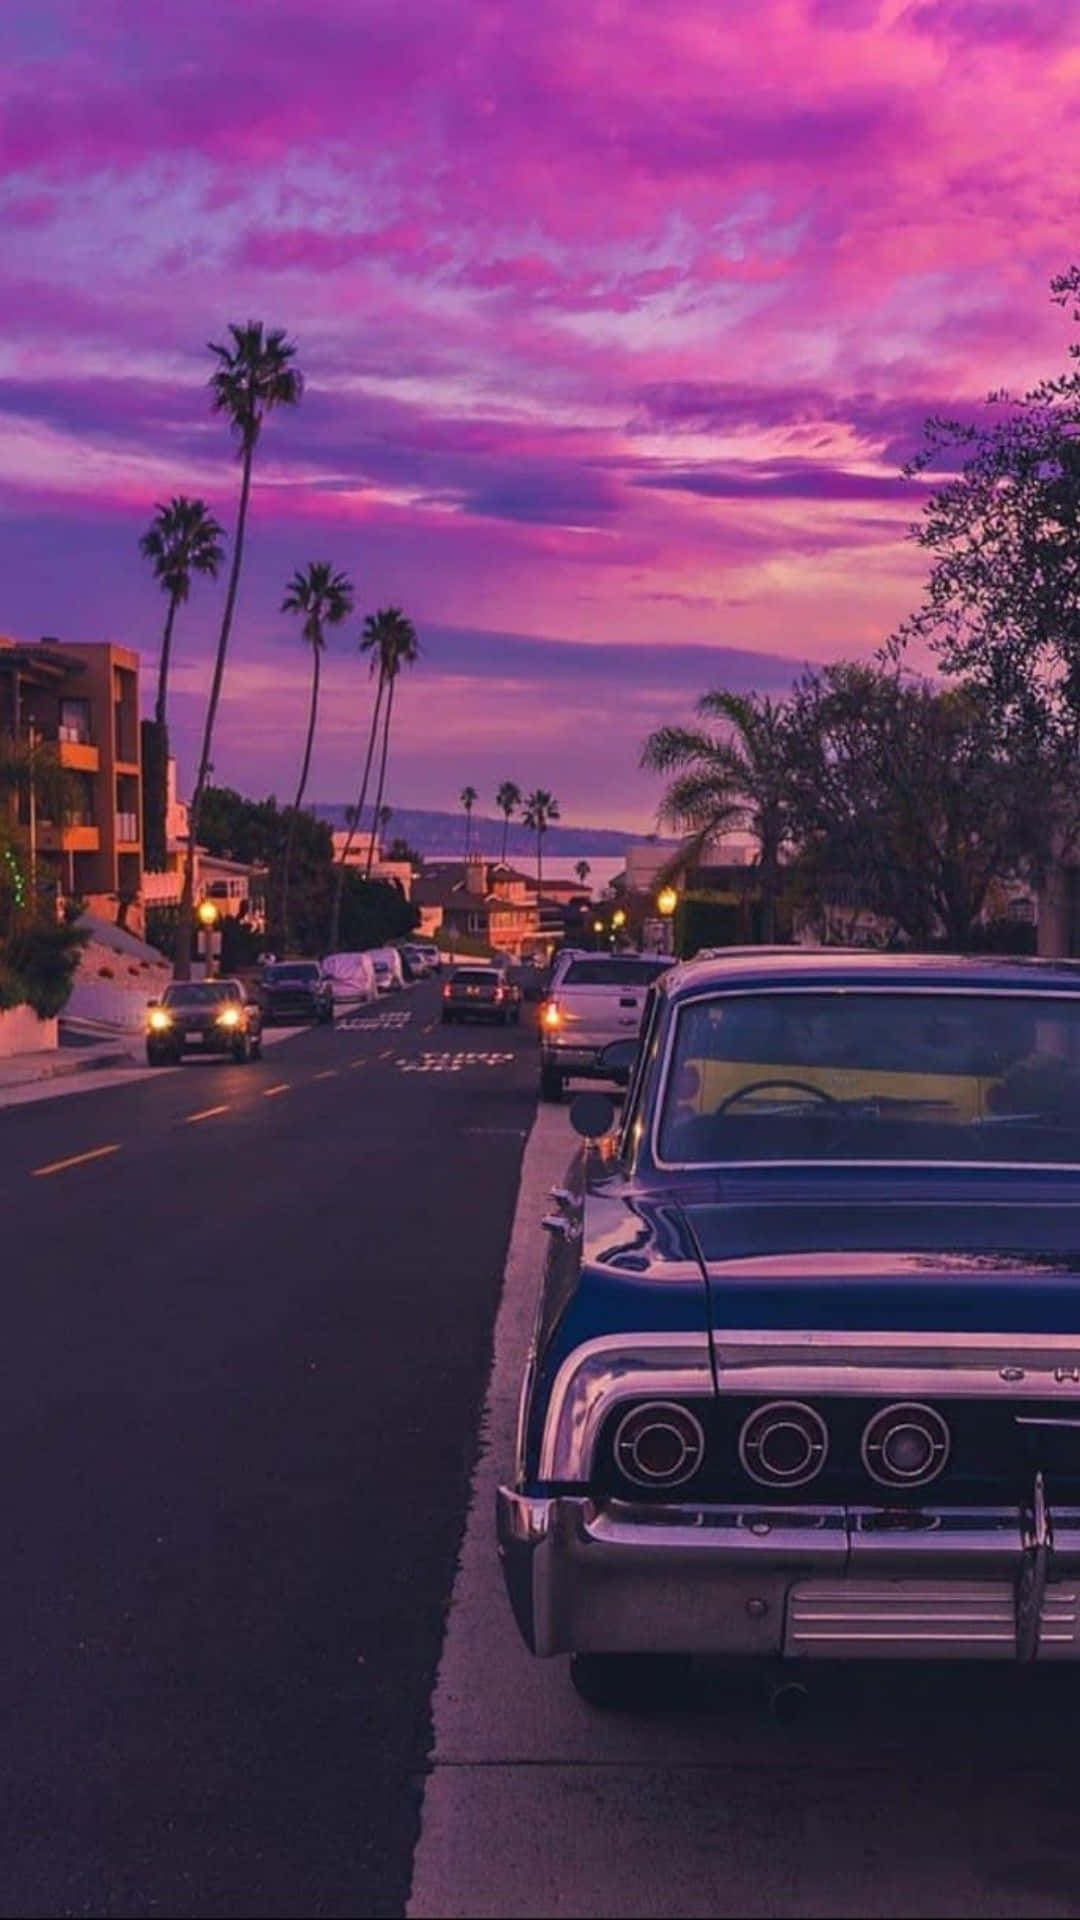 A Classic Car Parked On The Street At Sunset Wallpaper